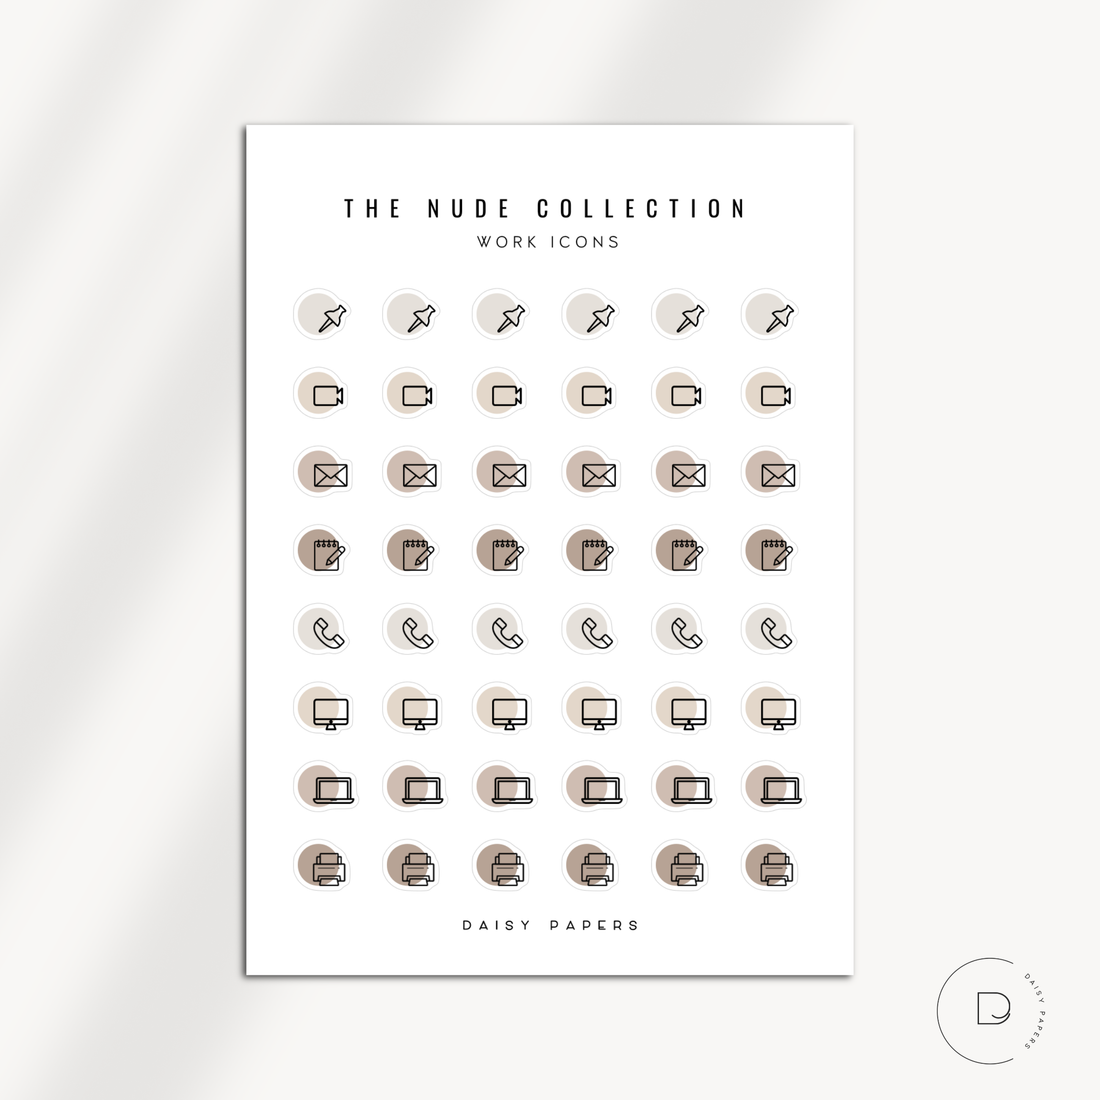 THE NUDE COLLECTION - Work Icons